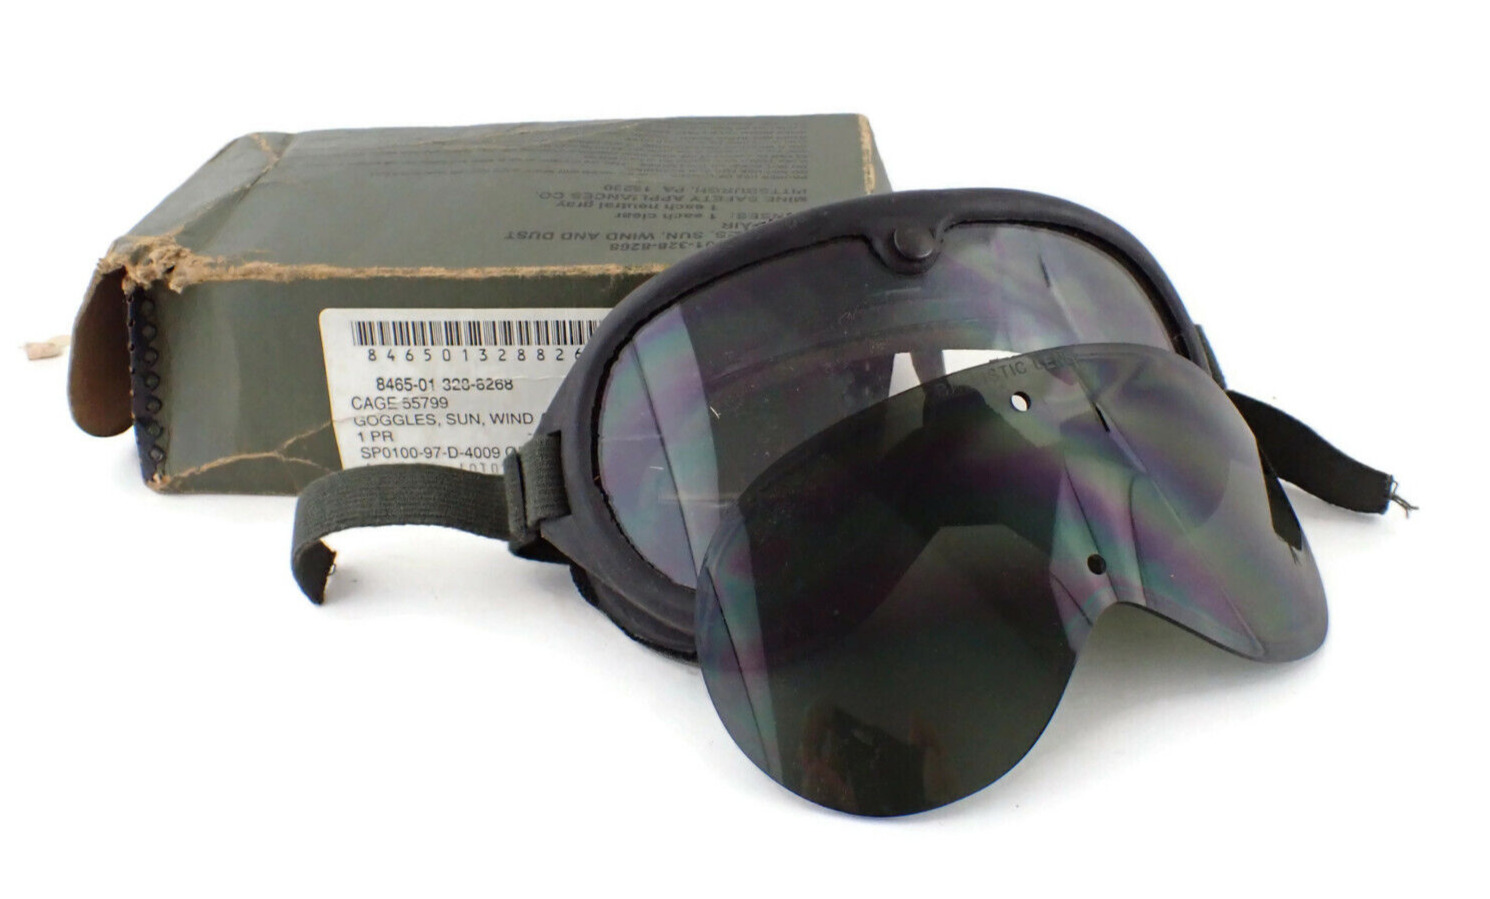 Vintage 1974 Military Goggles w/Box for Sun Wind & Dust no.8465 01 328 8268